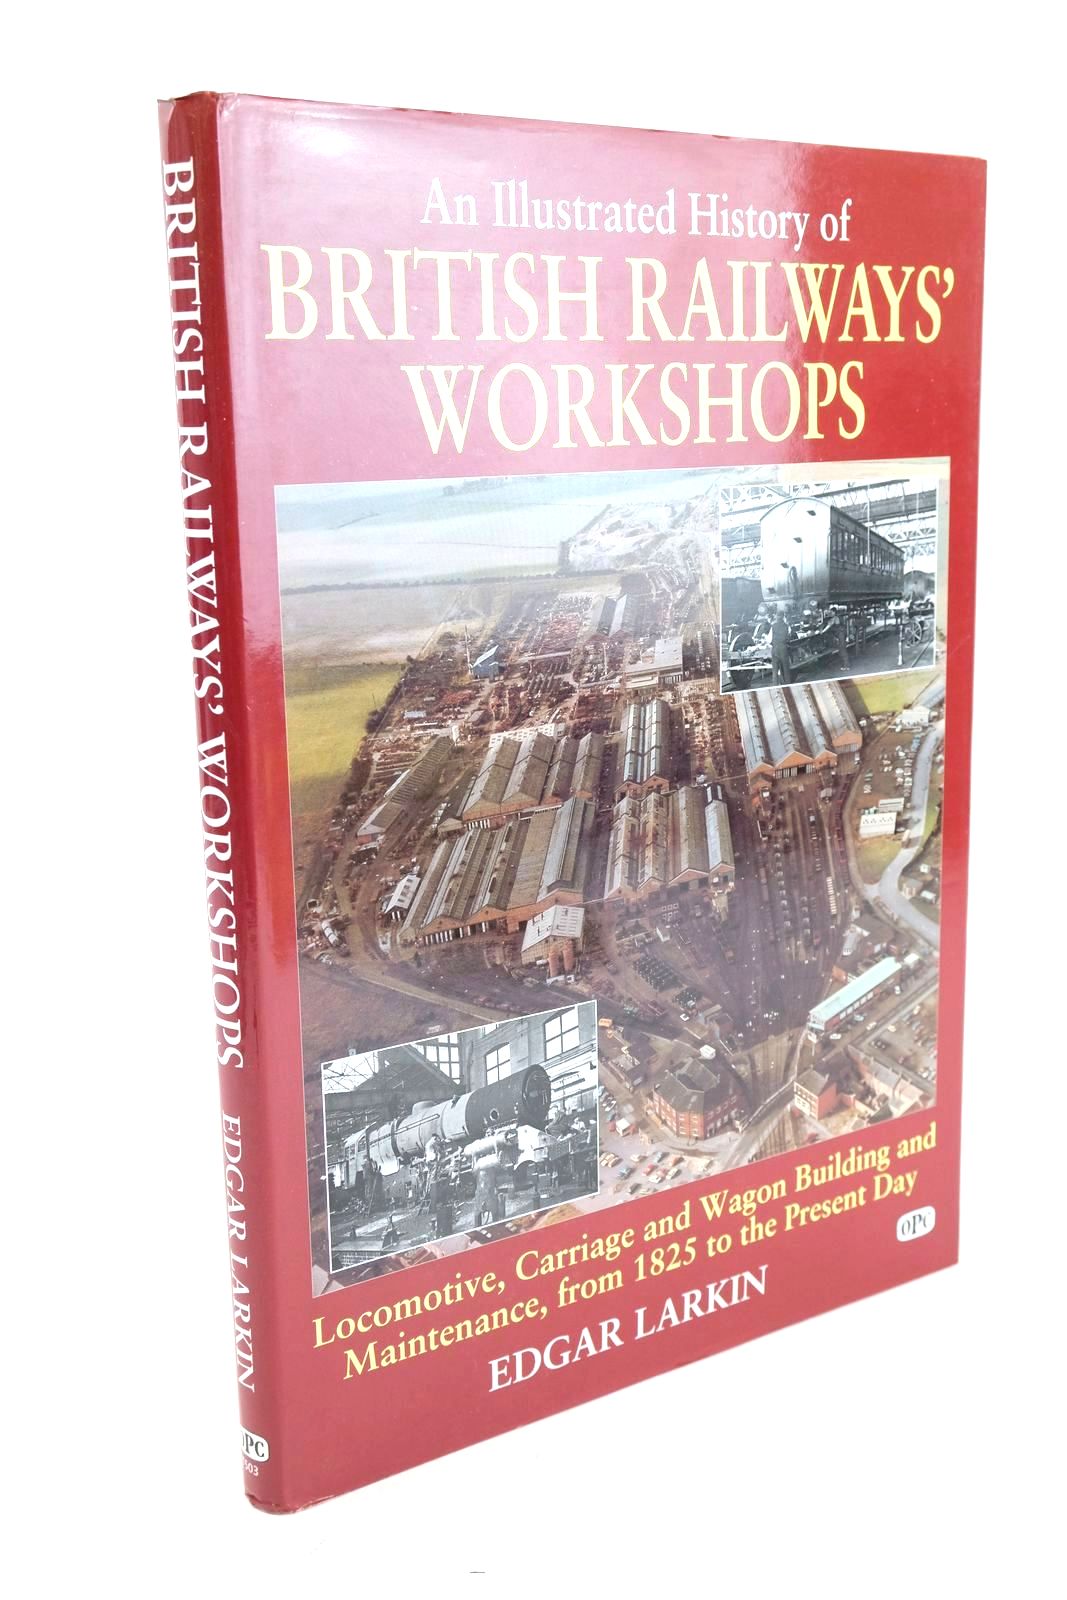 Photo of AN ILLUSTRATED HISTORY OF BRITISH RAILWAYS WORKSHOPS written by Larkin, Edgar J. published by Oxford Publishing (STOCK CODE: 1327108)  for sale by Stella & Rose's Books